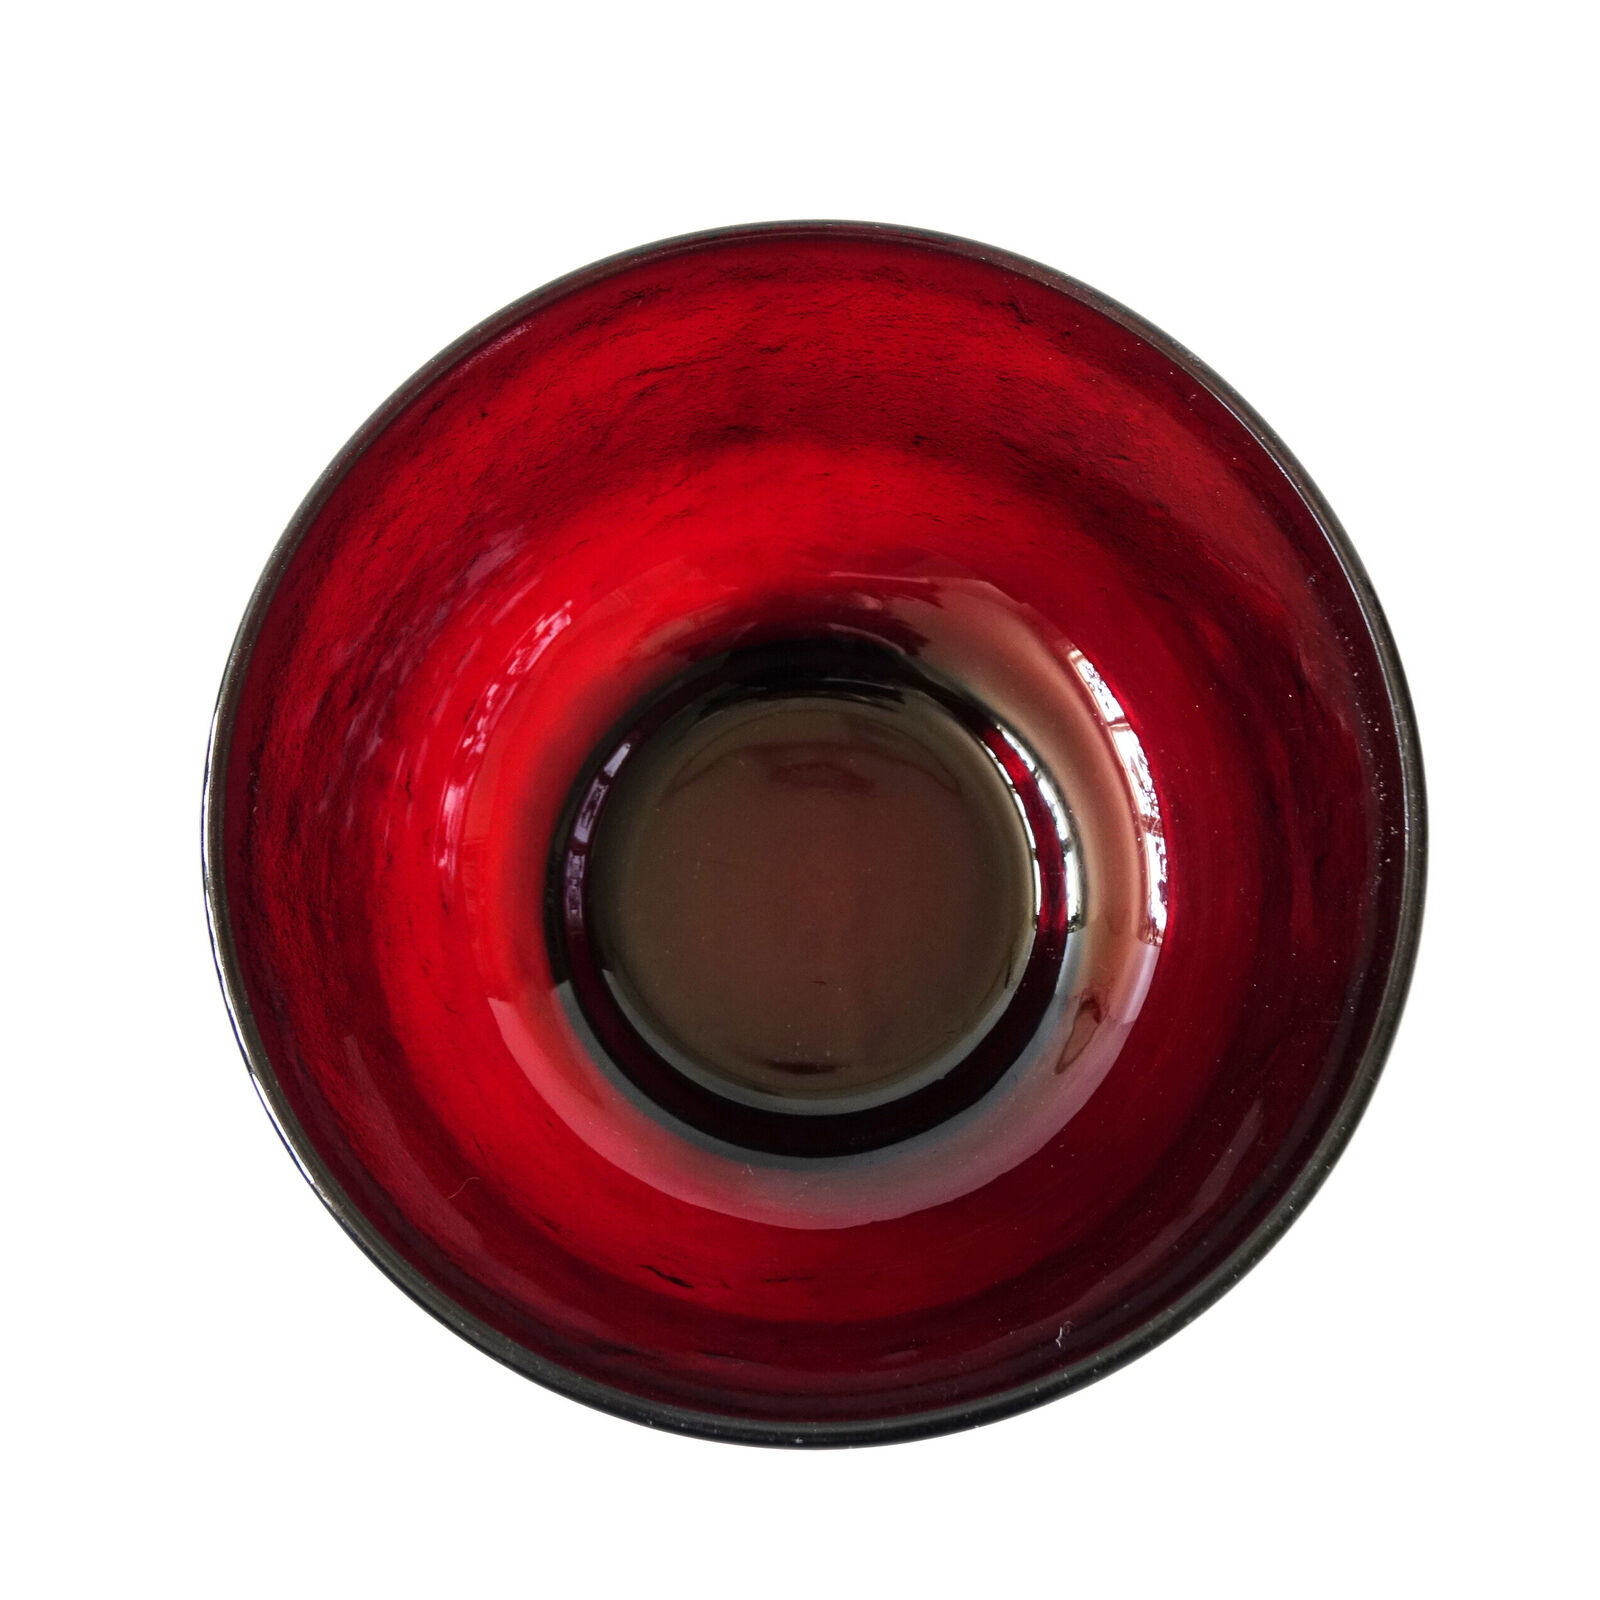 Vintage large retro pressed red glass bowl from Sweden 1960s